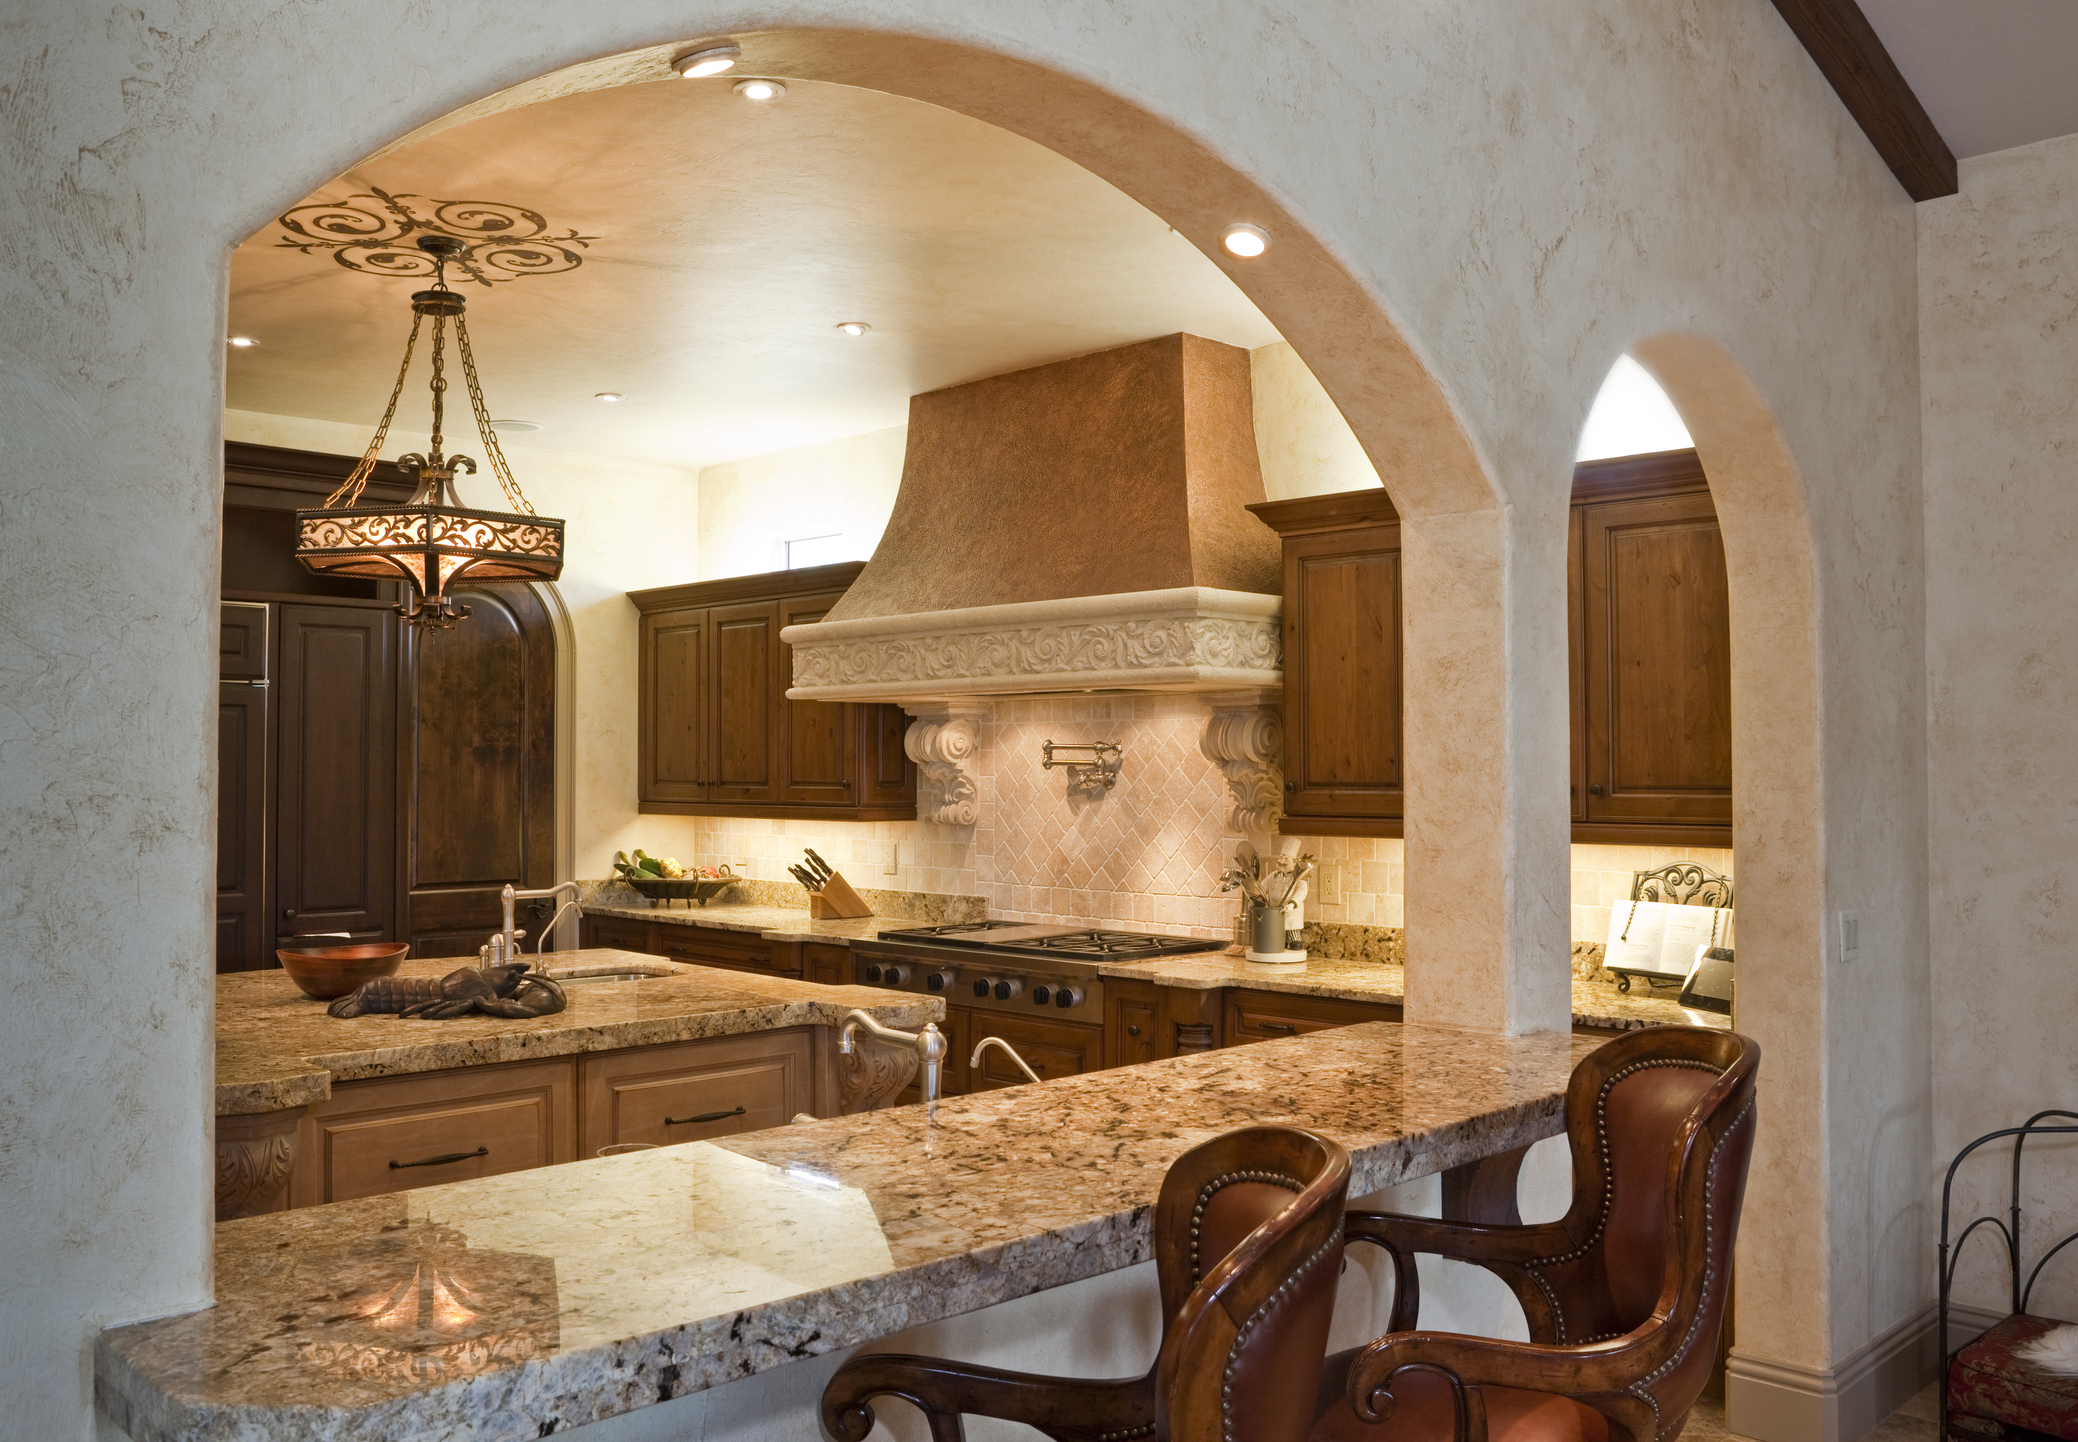 Elegant kitchen with arched entryway, granite countertops, and detailed wooden cabinetry